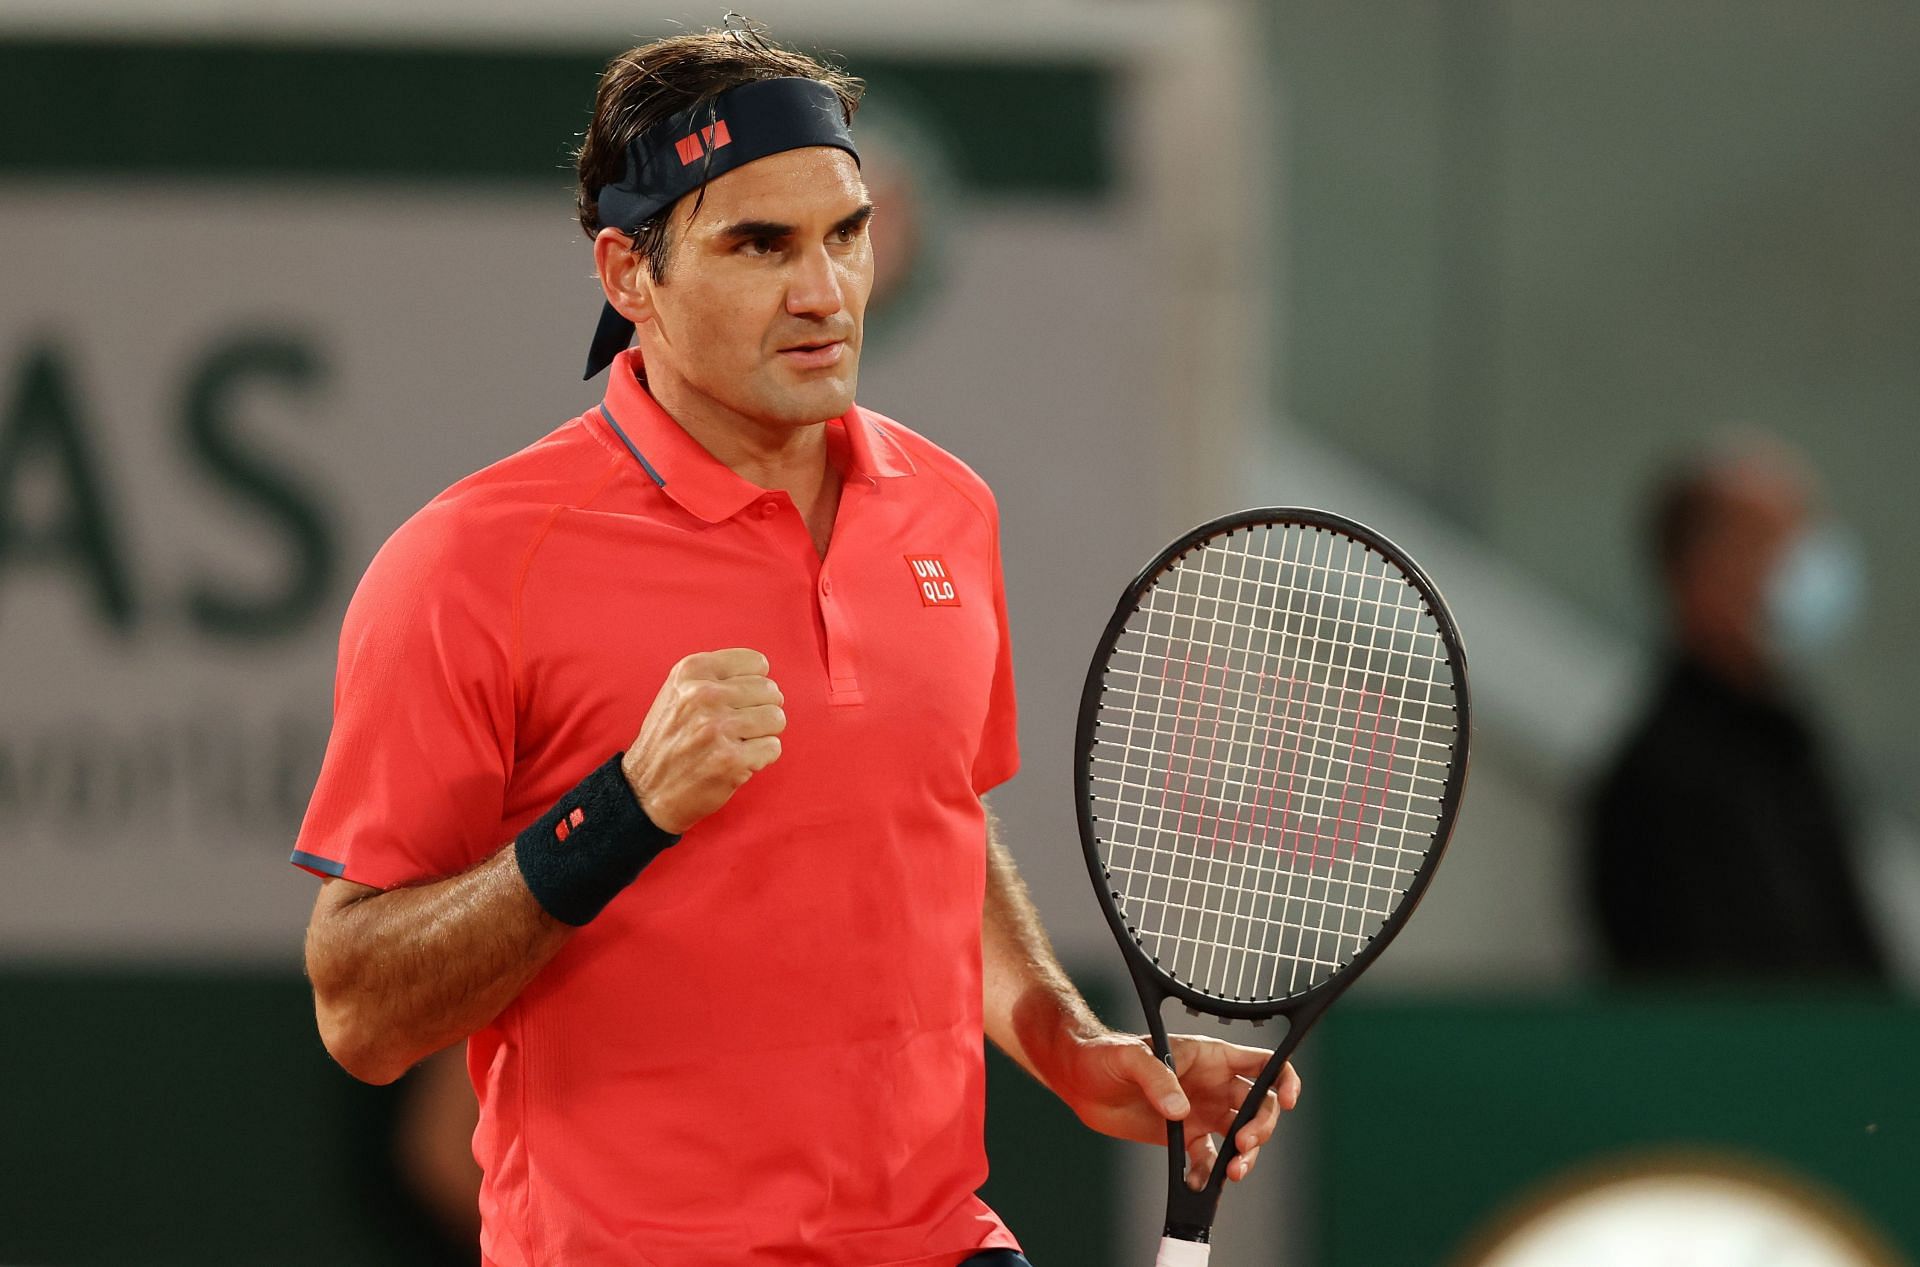 Roger Federer at the 2021 French Open